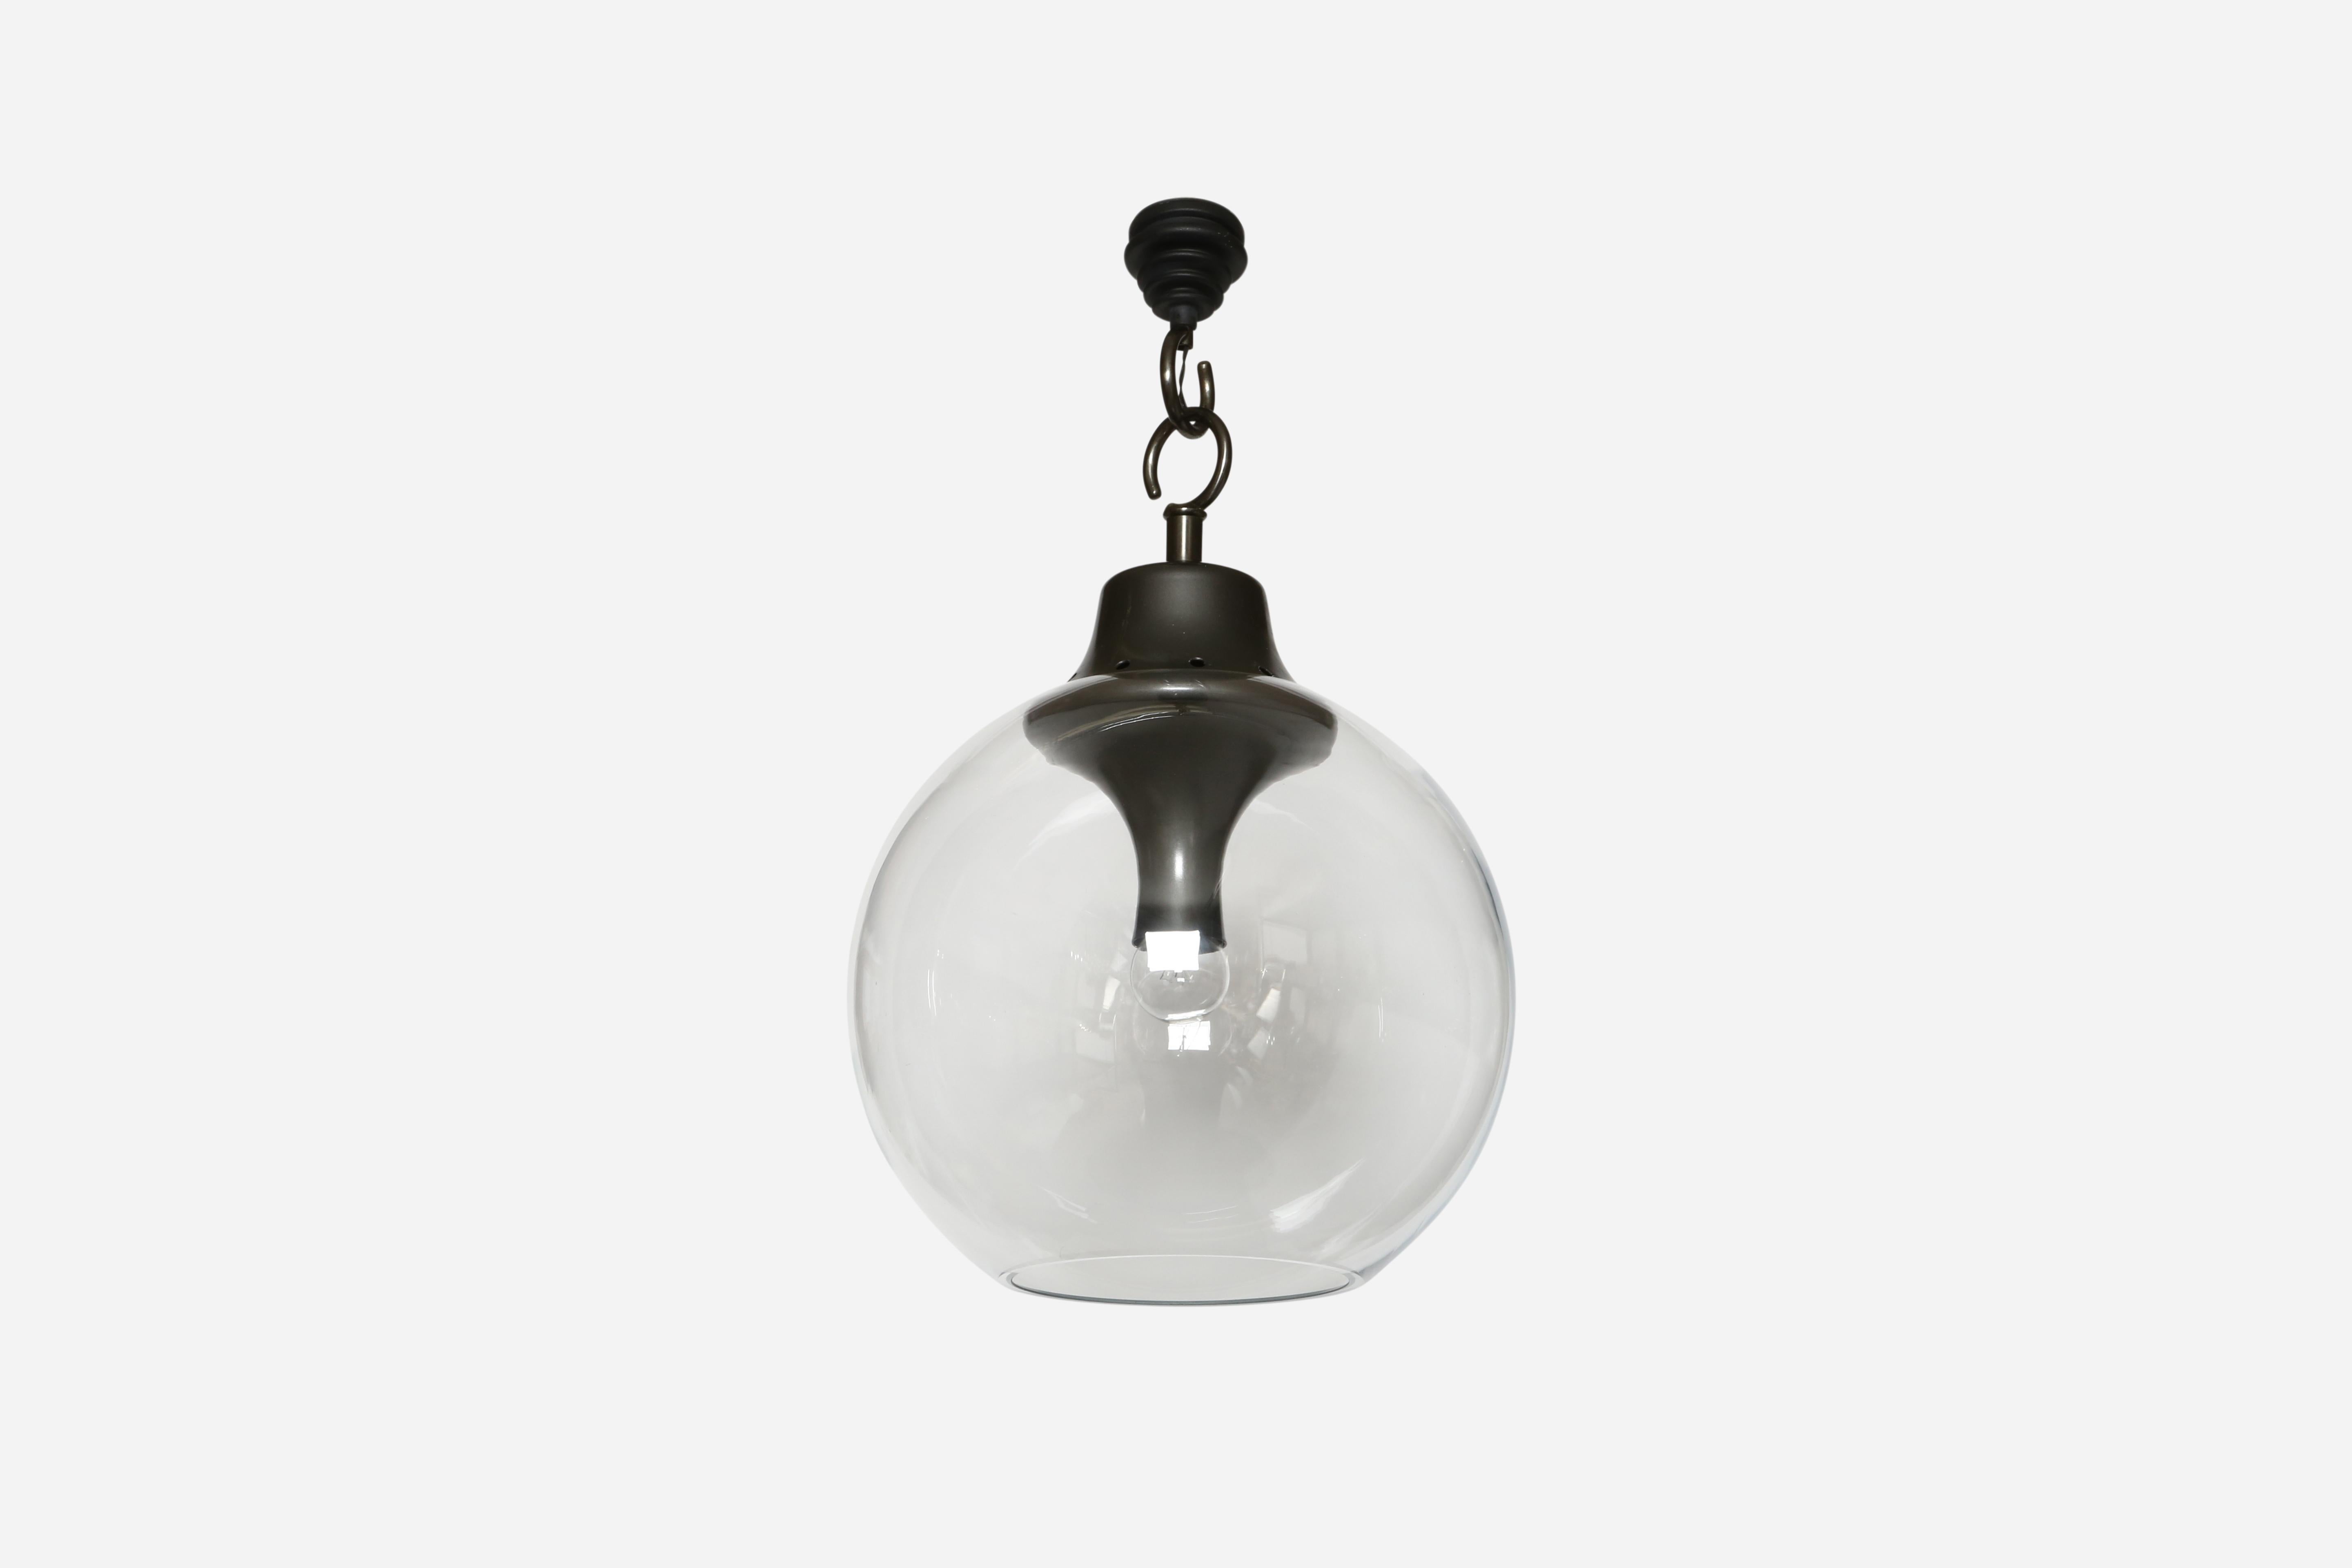 Luigi Caccia Dominioni for Azucena ceiling suspension light.
Model LS10 Boccia. Designed and manufactured in Italy in 1960s.
Murano glass, patinated aluminum glass holder, brass.
Rubber ceiling canopy.
Complimentary US rewiring with custom ceiling